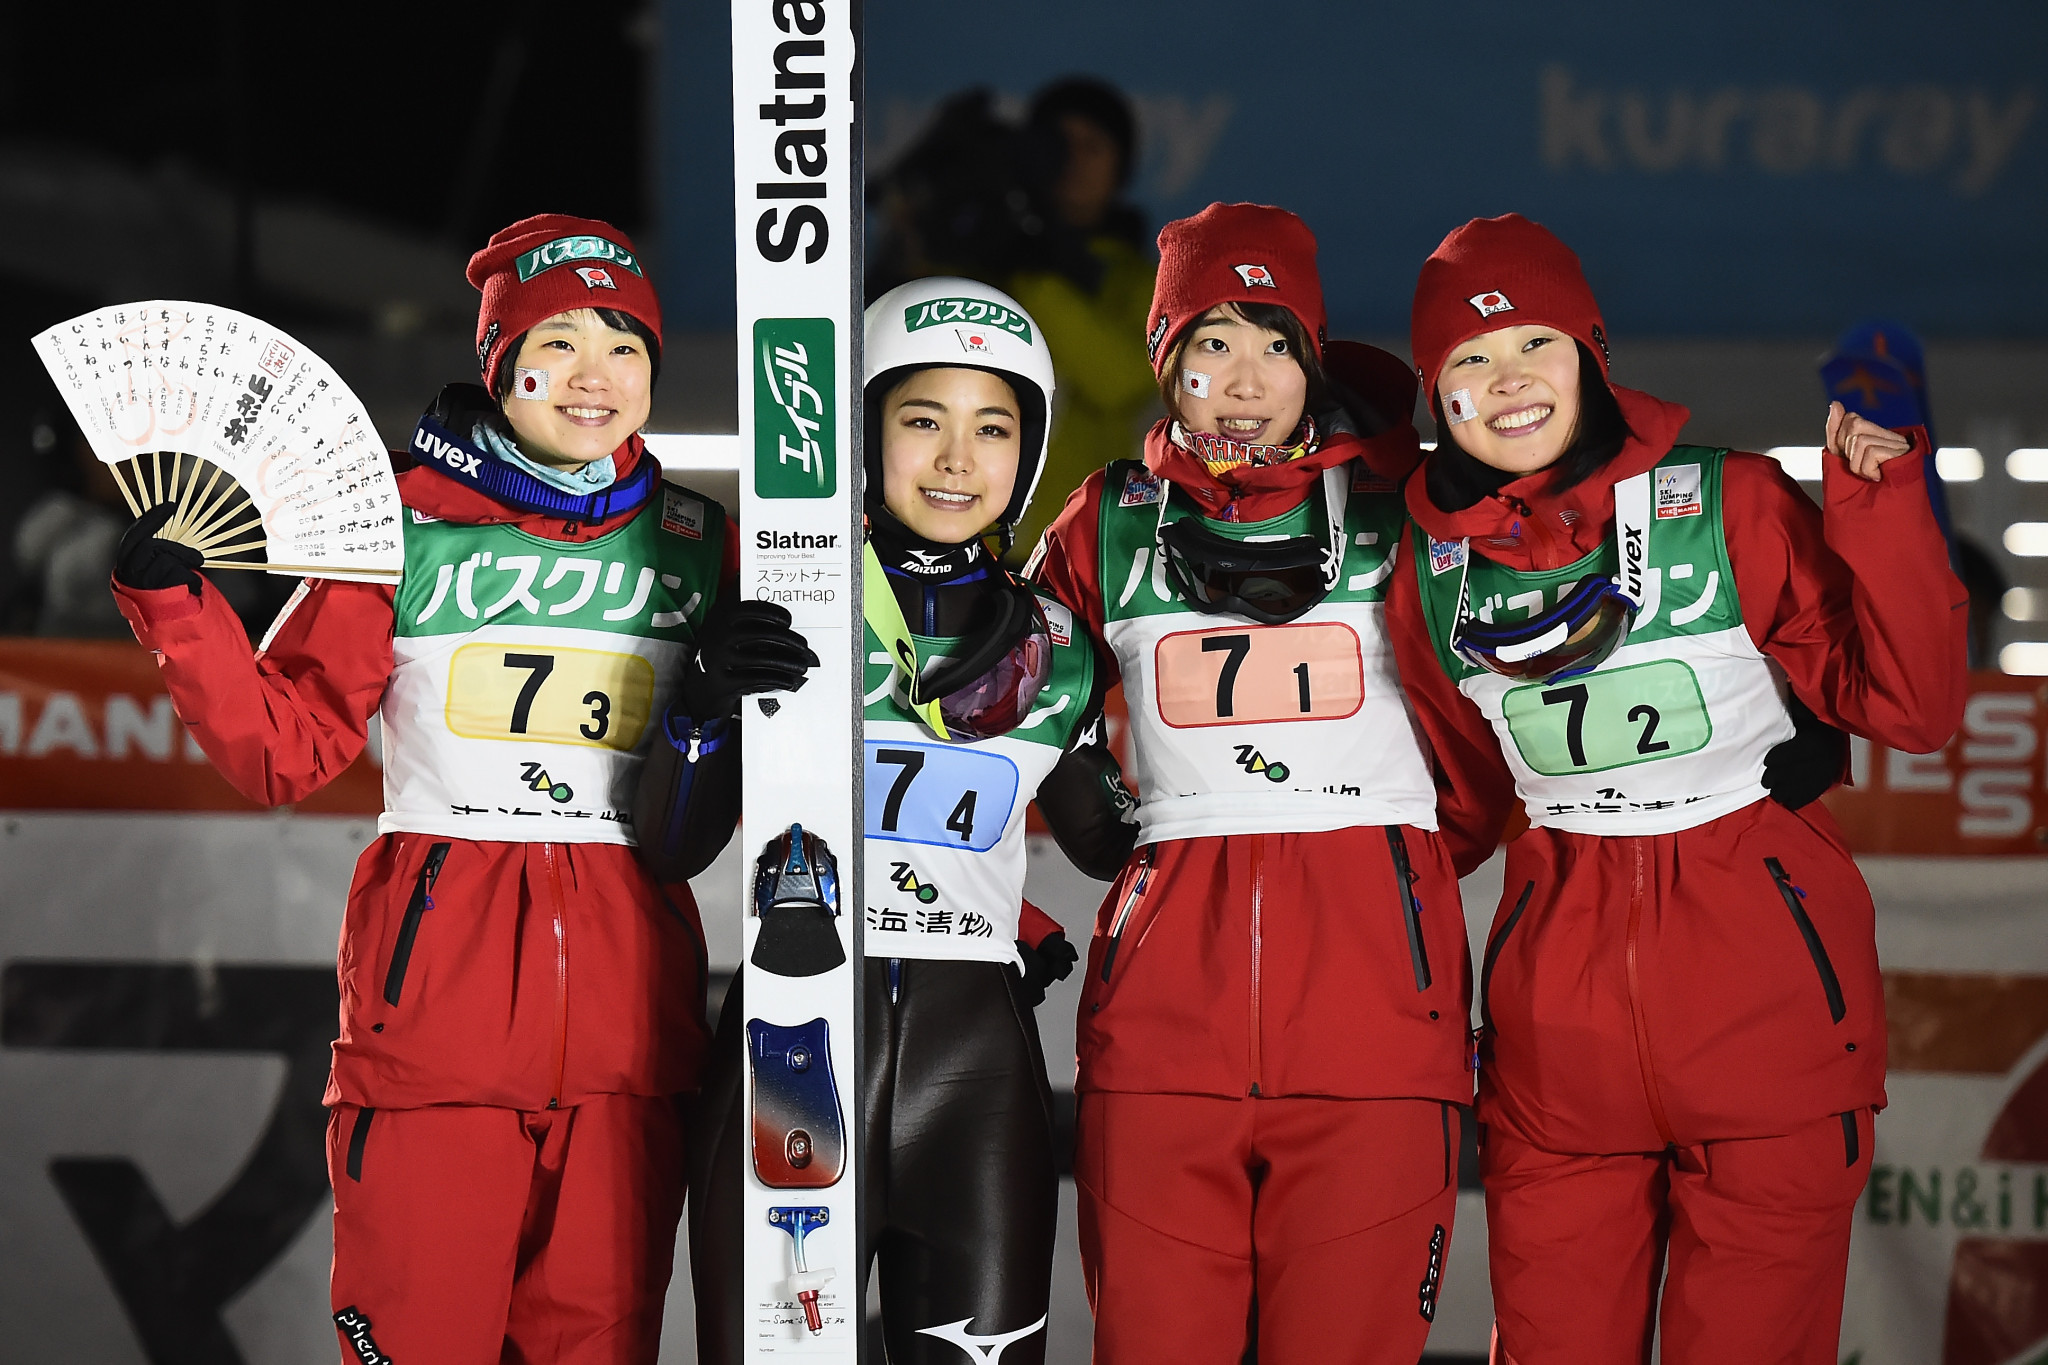 Japan won the ladies' team ski jumping event by more than 50 points ©Getty Images